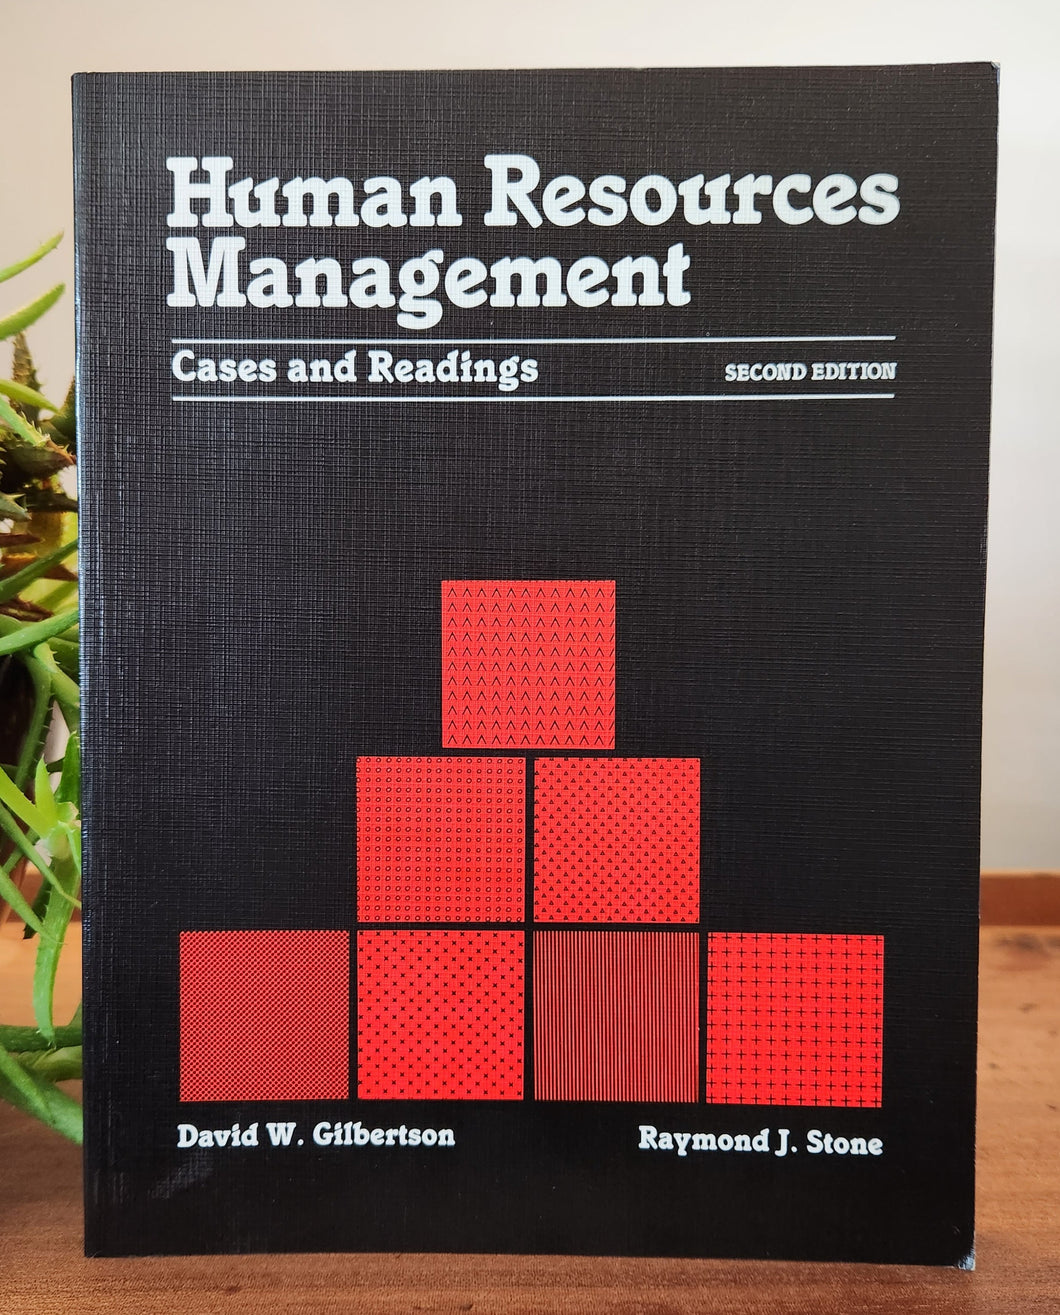 Human Resources Management: Cases and Readings (Second Edition) by David W. Gilbertson, Raymond J. Stone